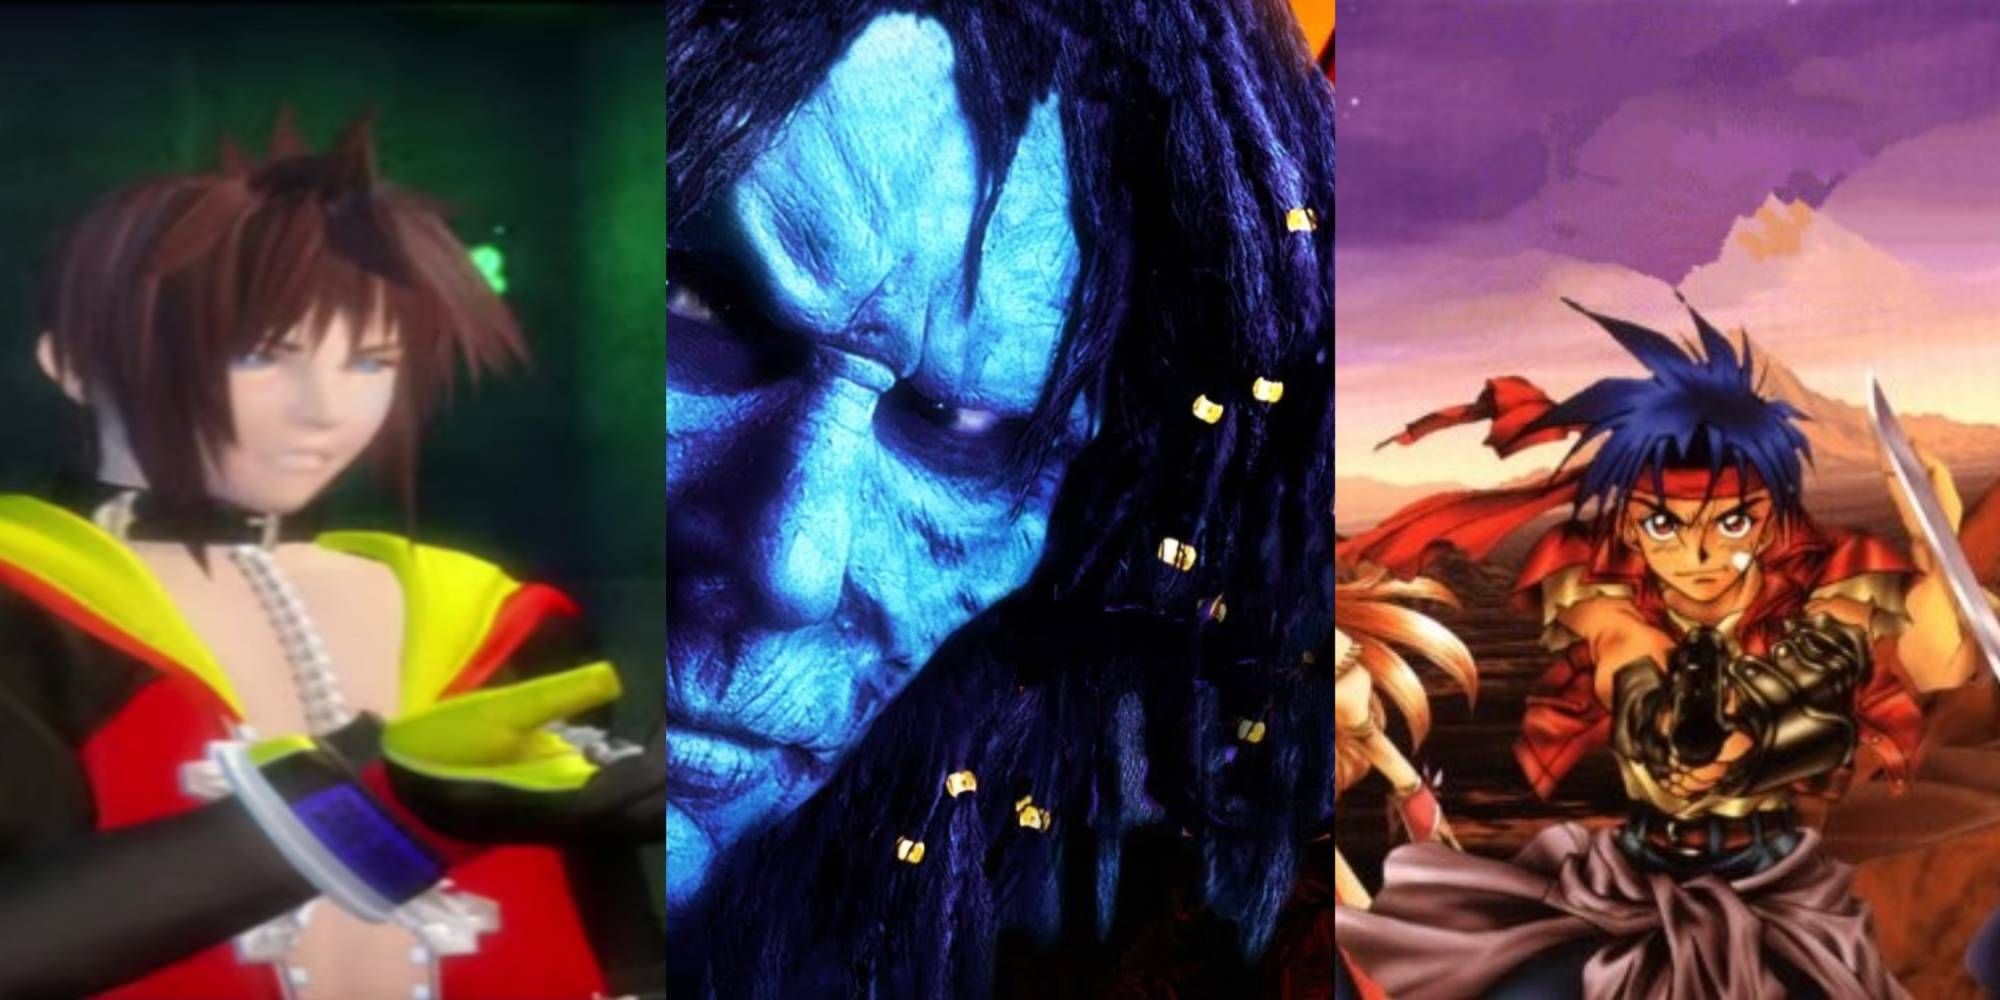 Cult classic JRPG 'Chrono Cross' is getting a remaster for consoles and PC